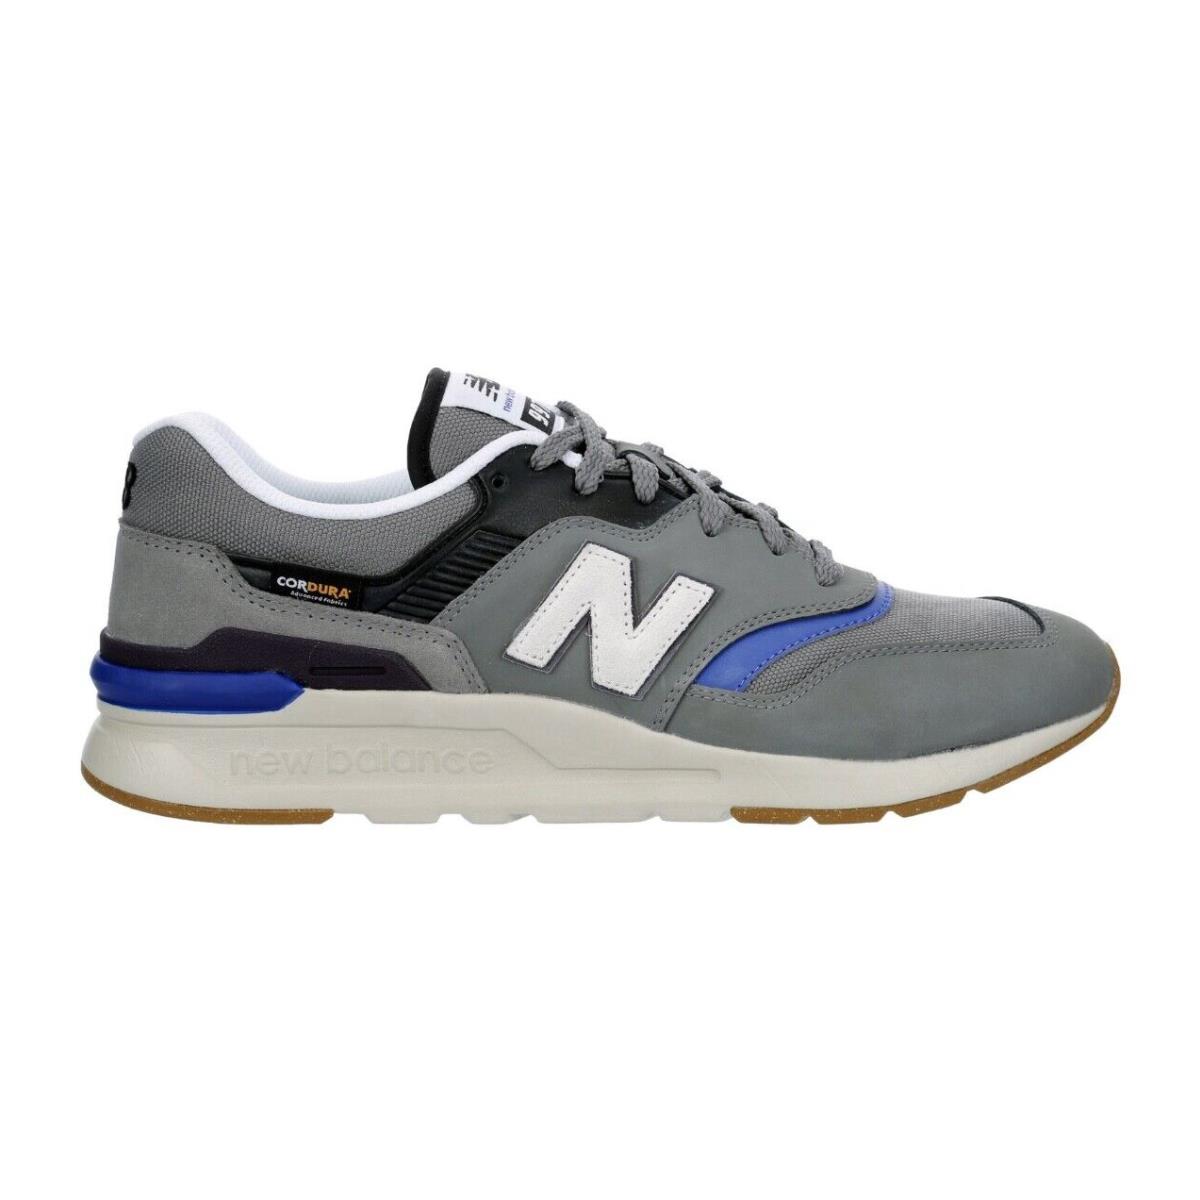 New Balance 997H Cordura Men`s Suede Athletic Running Casual Fashion Shoes Space Gray/Blue